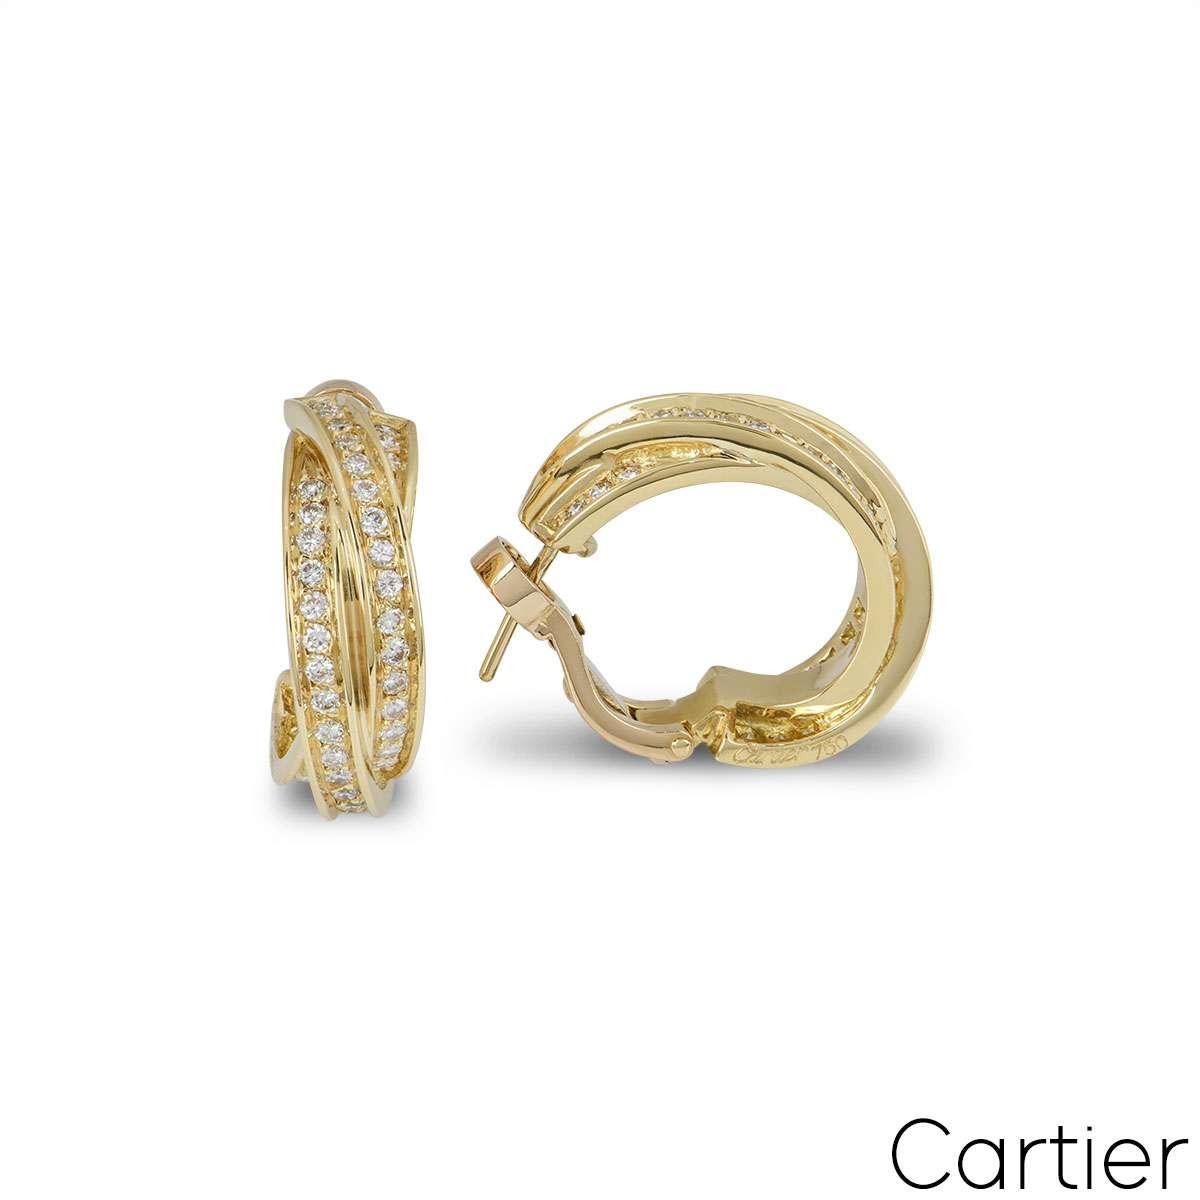 A sparkly pair of 18k yellow gold Cartier diamond hoop earrings from the Trinity de Cartier collection. The earrings comprise of 3 intertwined yellow gold bands with round brilliant cut diamonds pave set throughout. The diamonds have a total weight